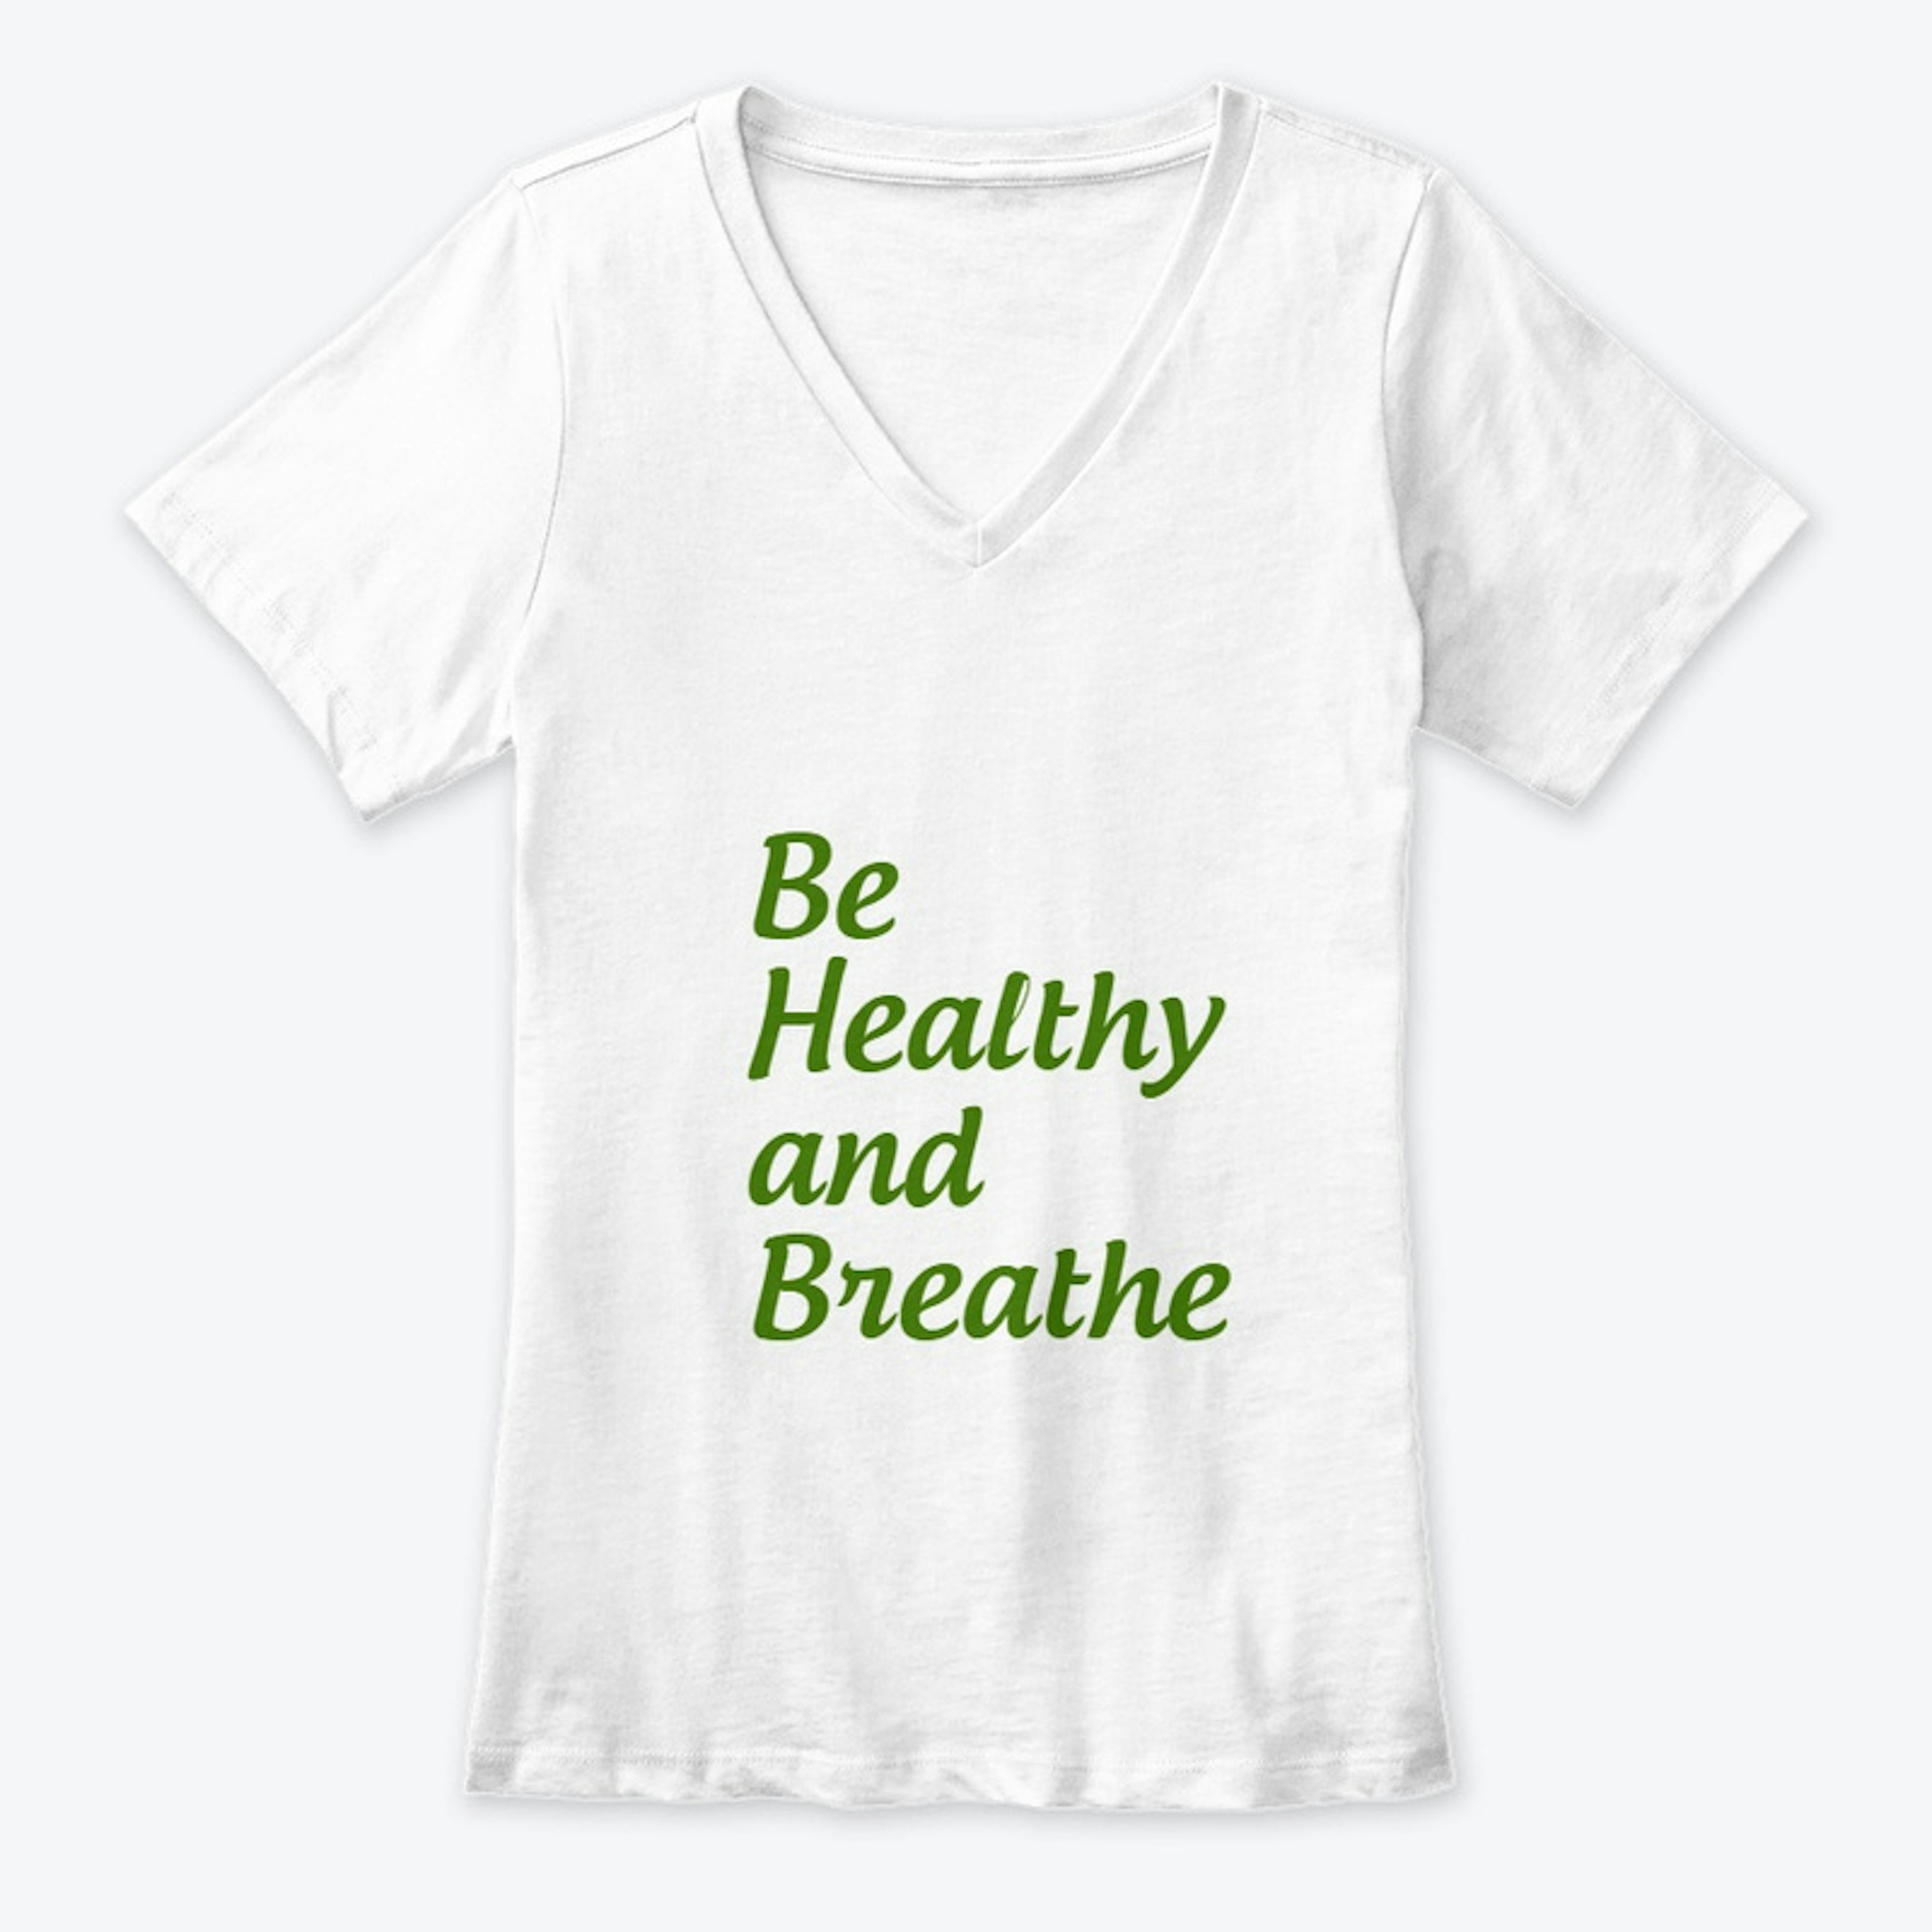 "Be Healthy and breathe" by Pharmaquiz